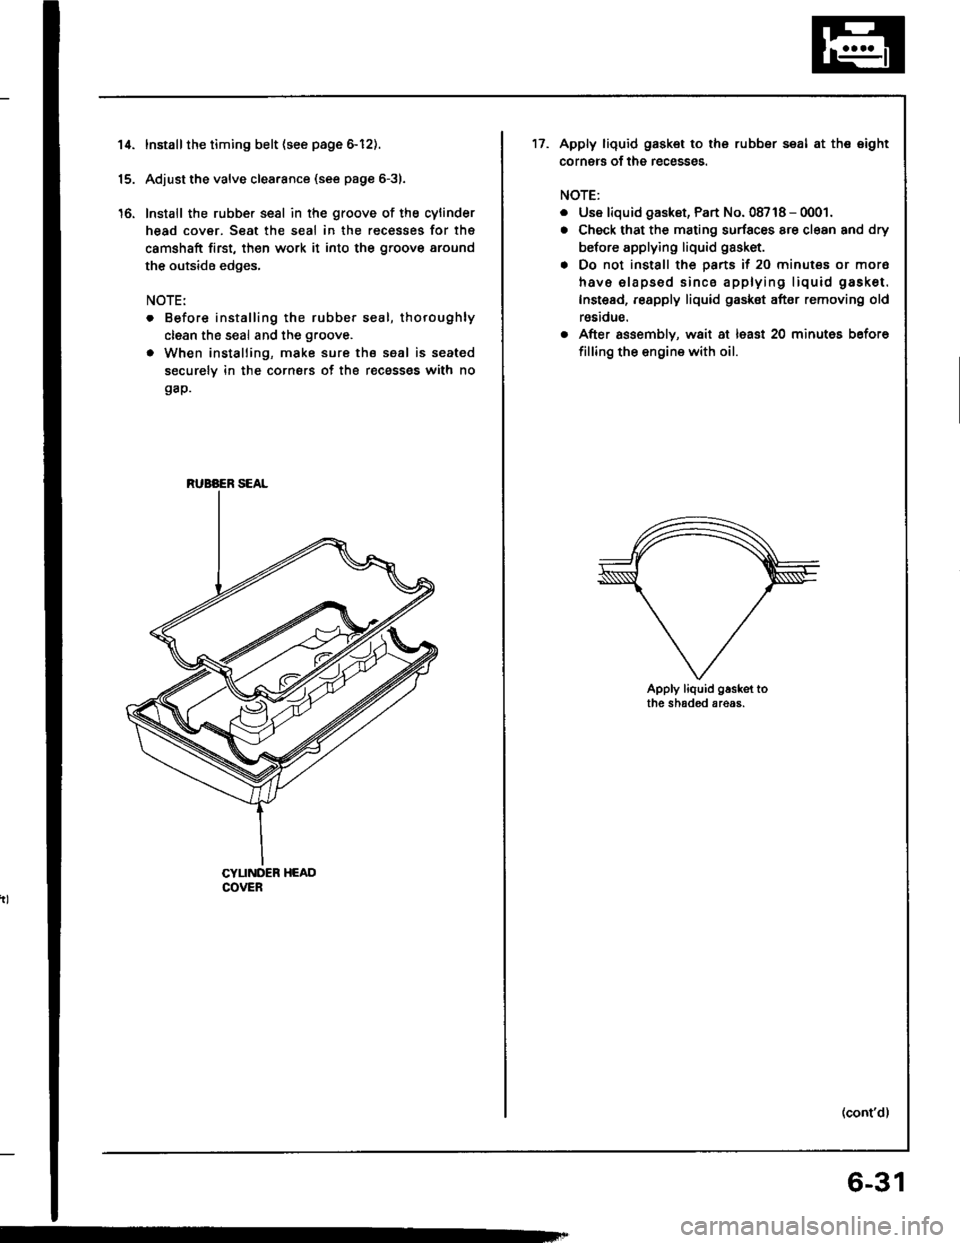 HONDA INTEGRA 1994 4.G Workshop Manual 14.
16.
Installthe timing belt {see page 6-12).
Adjust the valve clea.ance (see page 6-31.
Install the rubber seal in the groove of the cylinder
head cover. Seat the seal in the recesses for thg
camsh